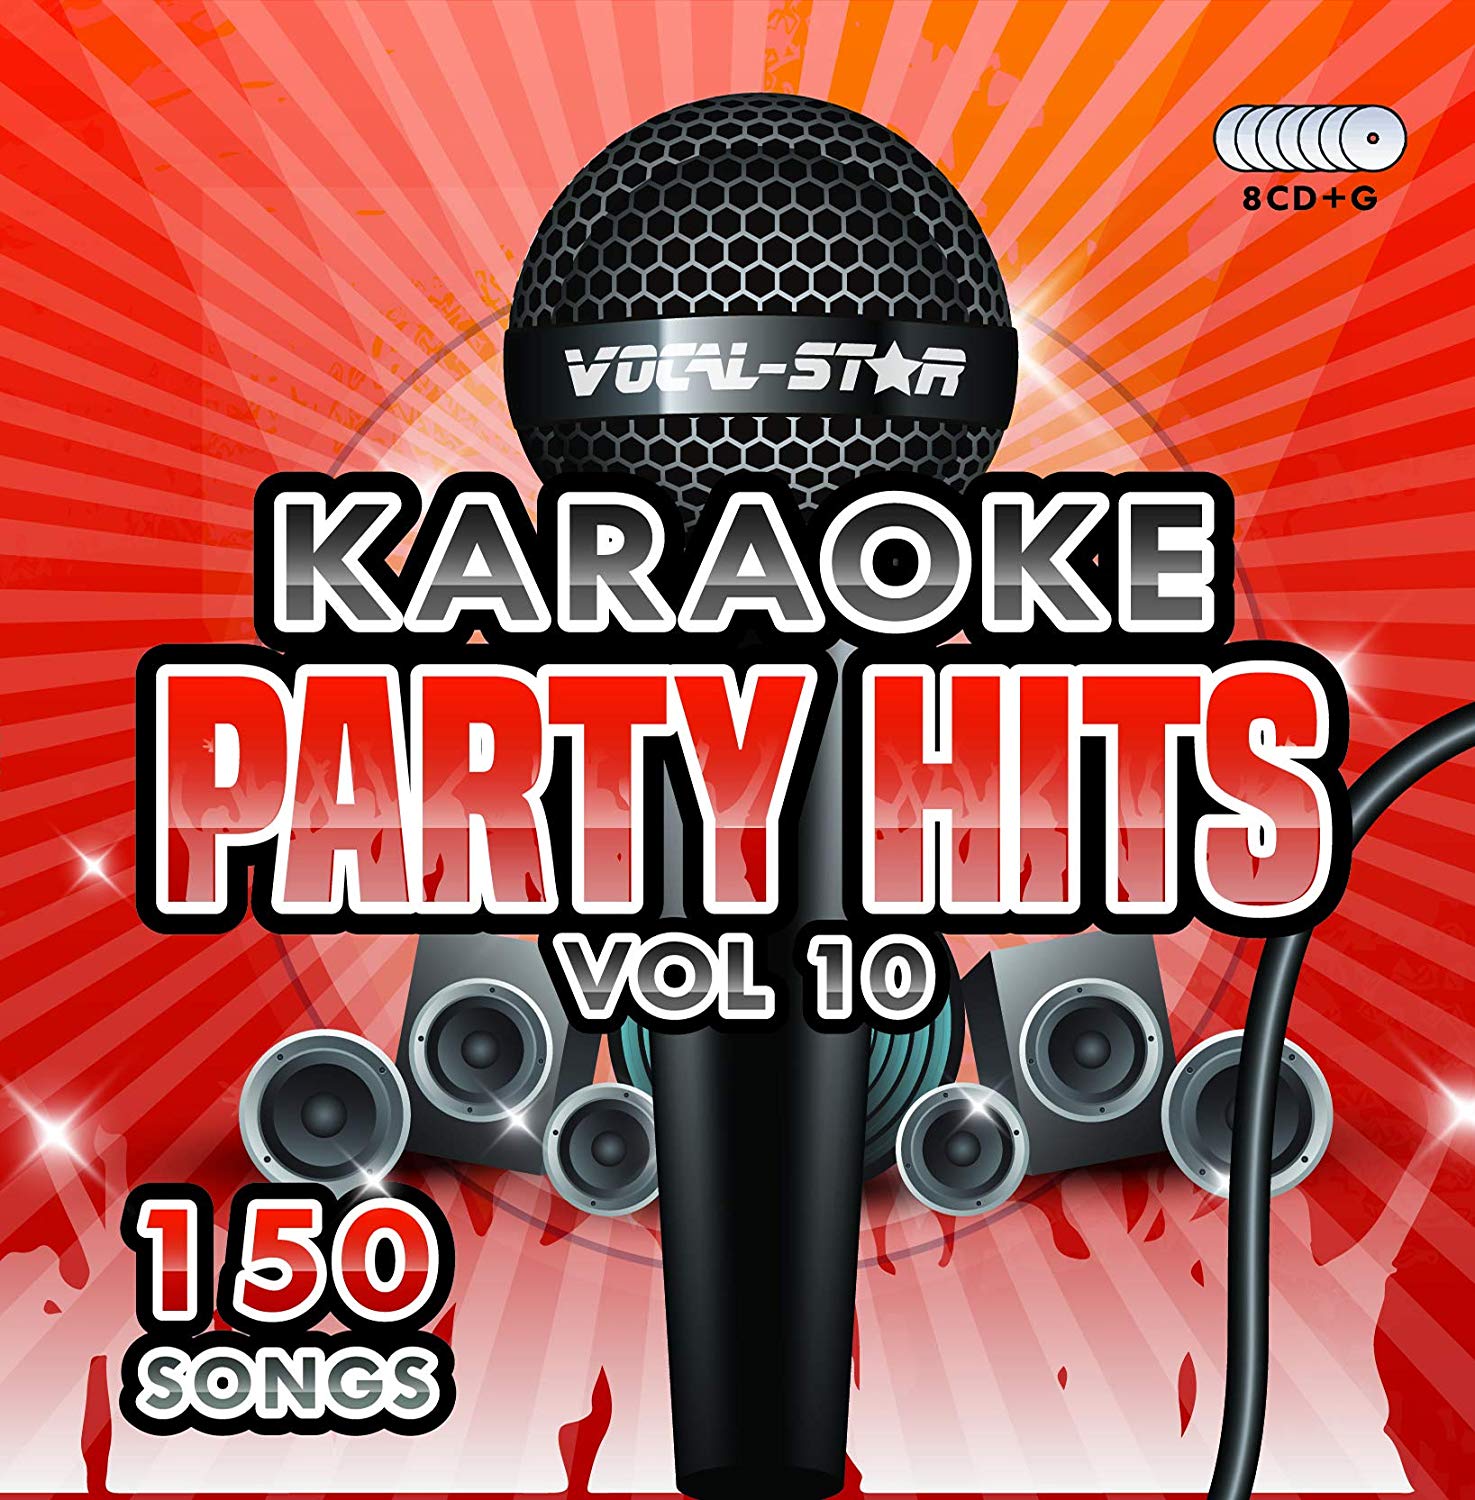 Vocal-Star Party Hits 10 Karaoke Disc Set 8 CDG Discs 150 Songs